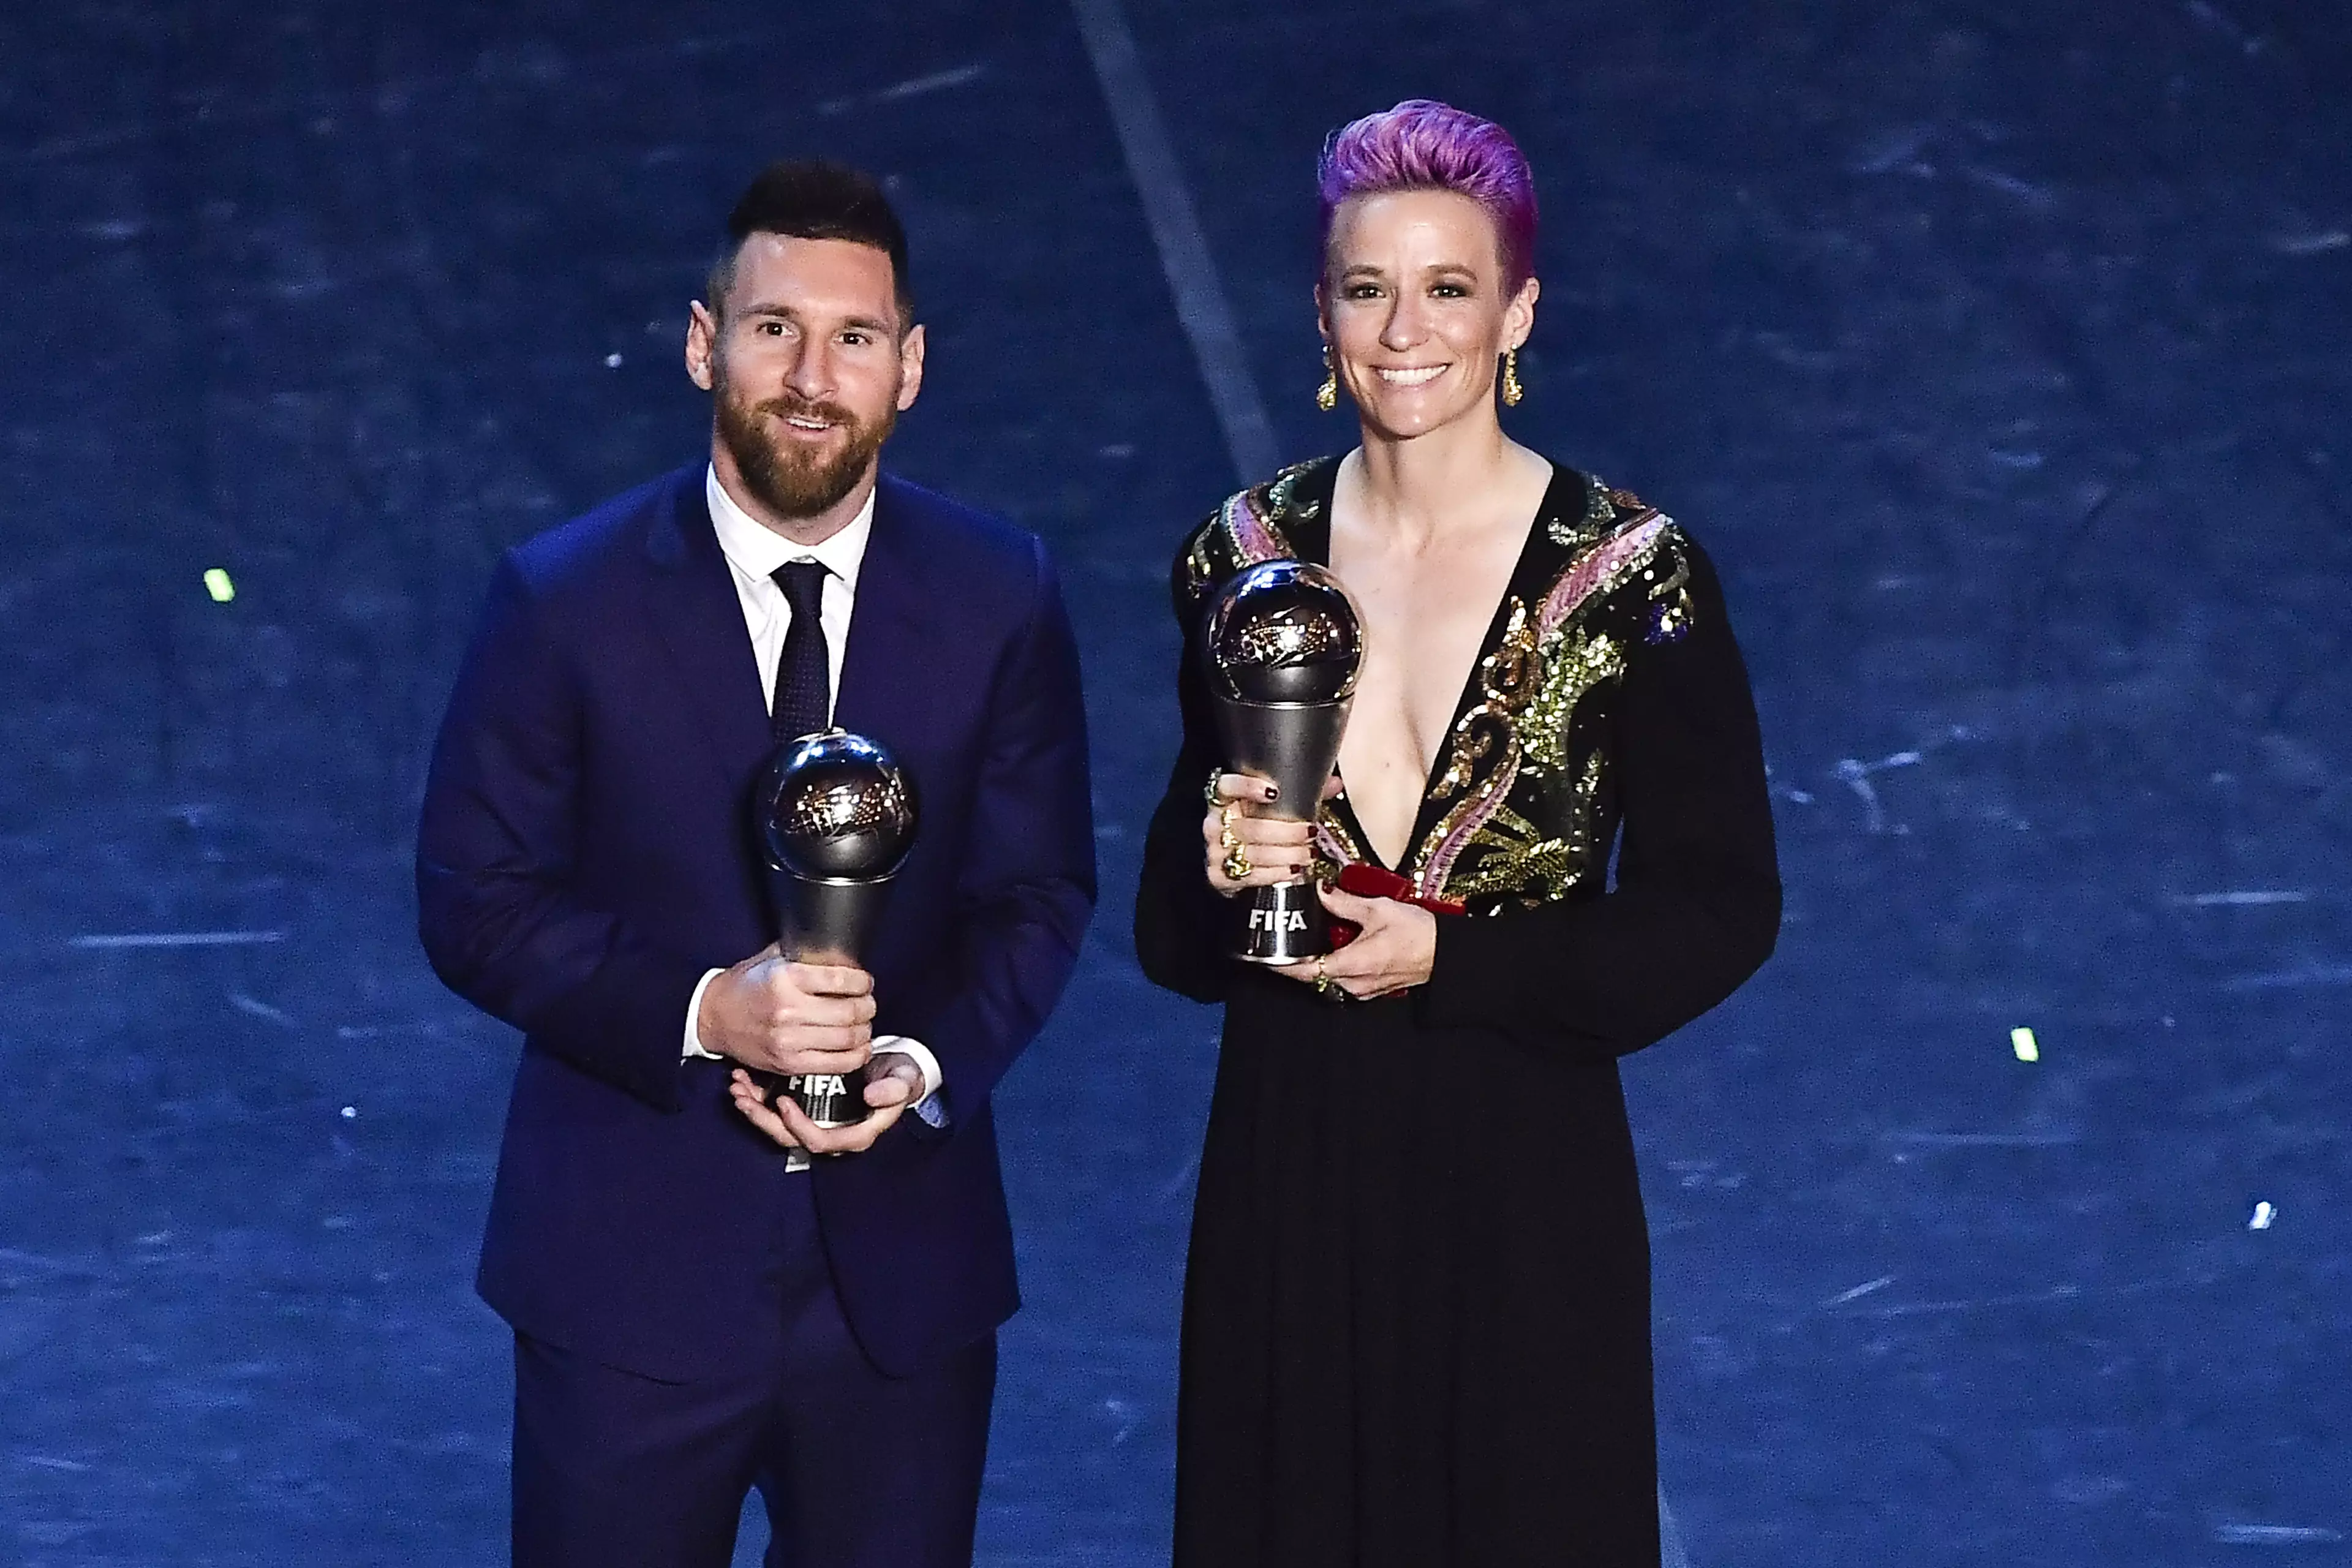 After running away from the red carpet Messi collects his award alongside Megan Rapinoe. Image: PA Images